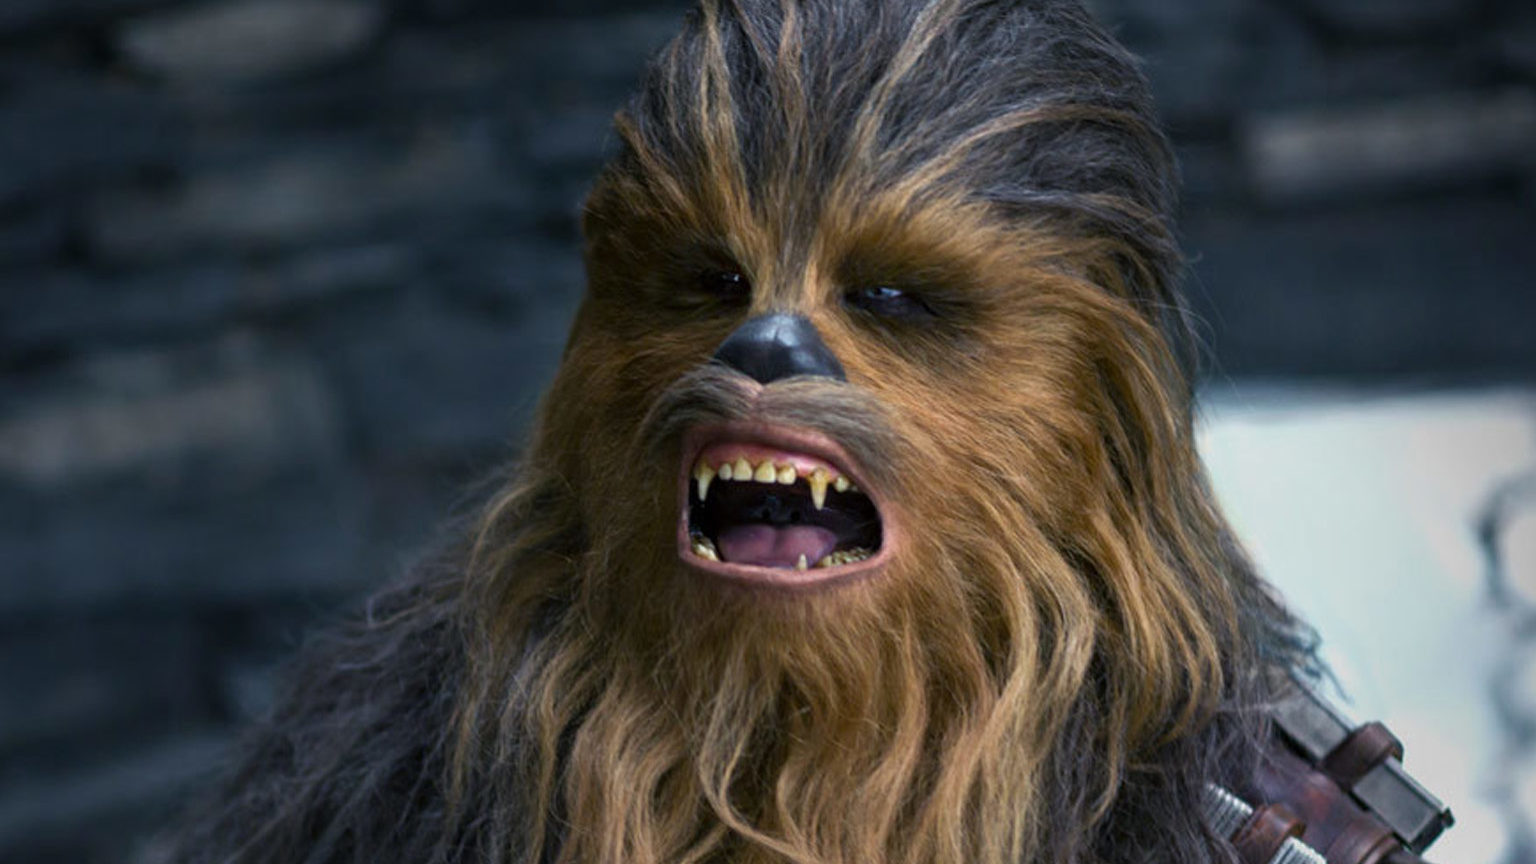 Do You Know a Little Bit About Everything: “Star Wars” Edition Star Wars Chewbacca